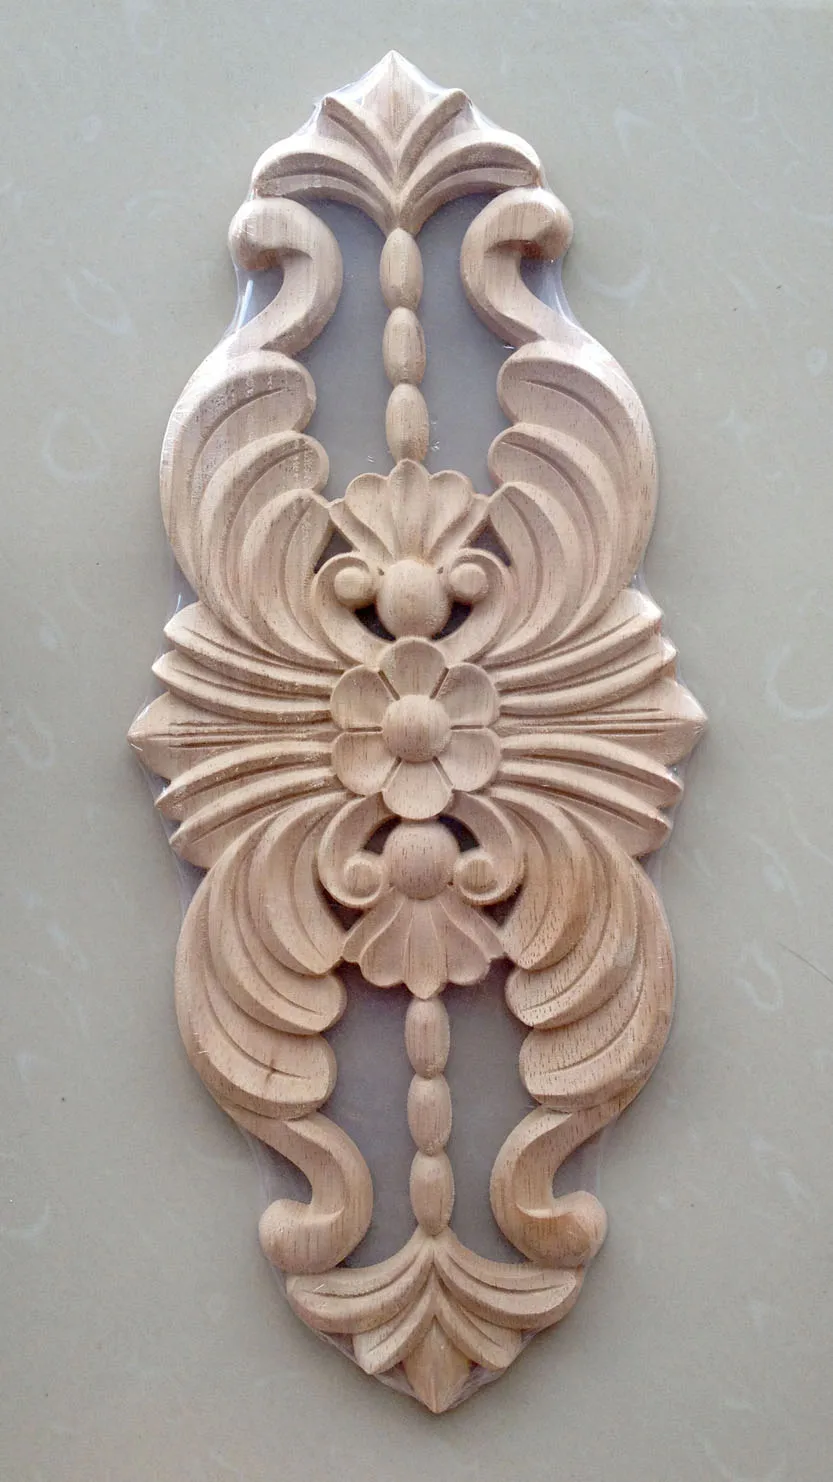  wood carving design with flower